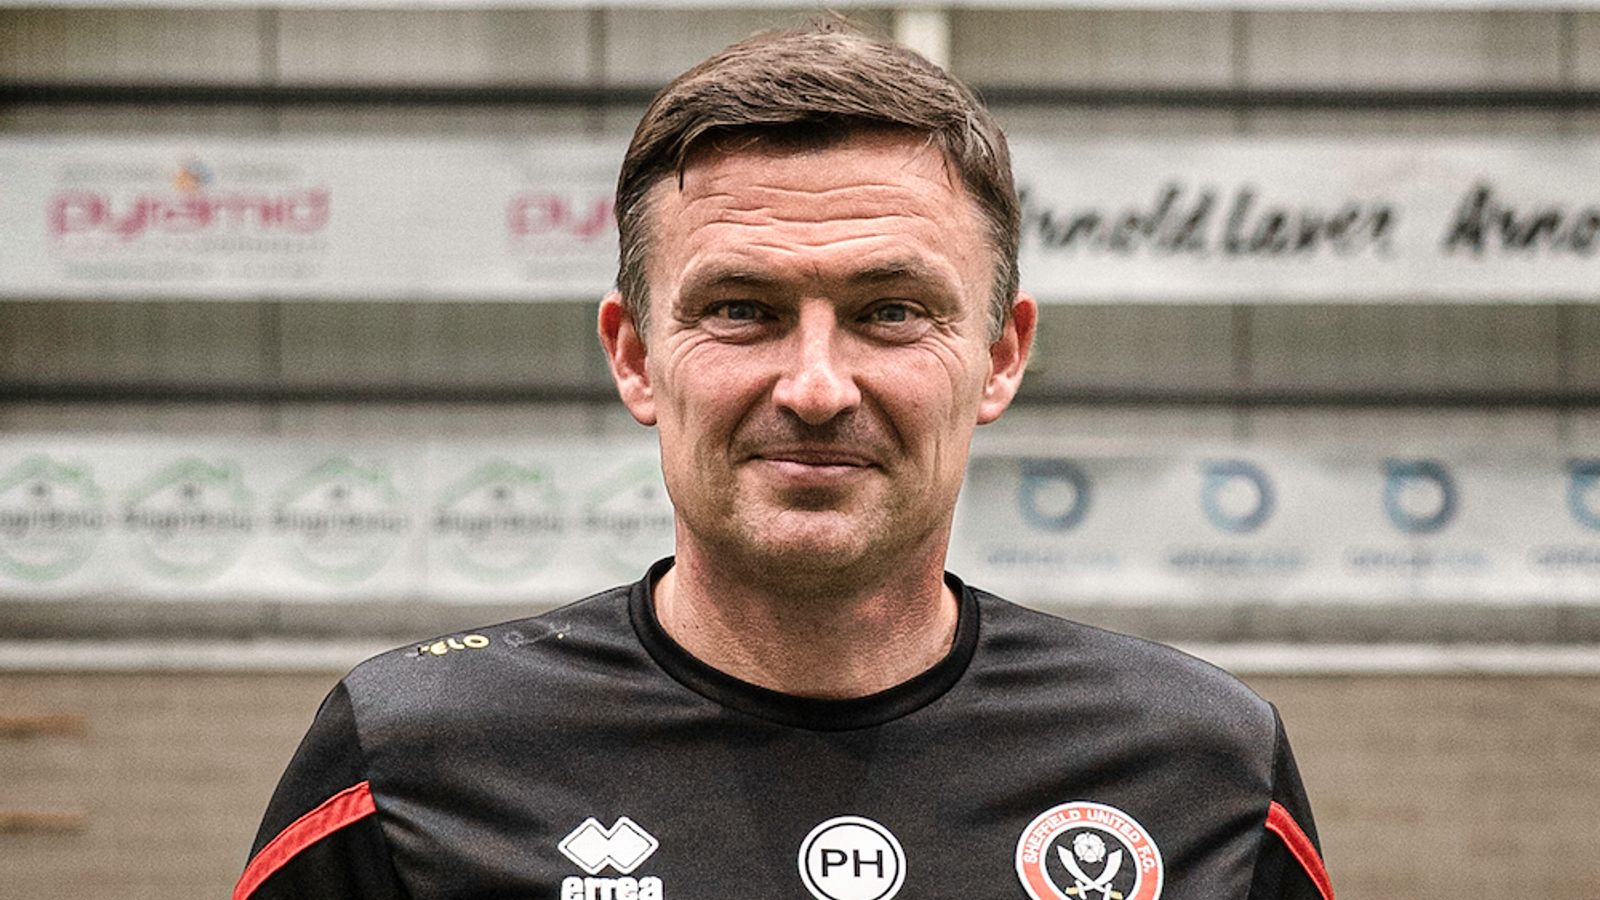 Paul Heckingbottom interview: Sheffield United boss on injuries, play-off hangovers and finding his style of play